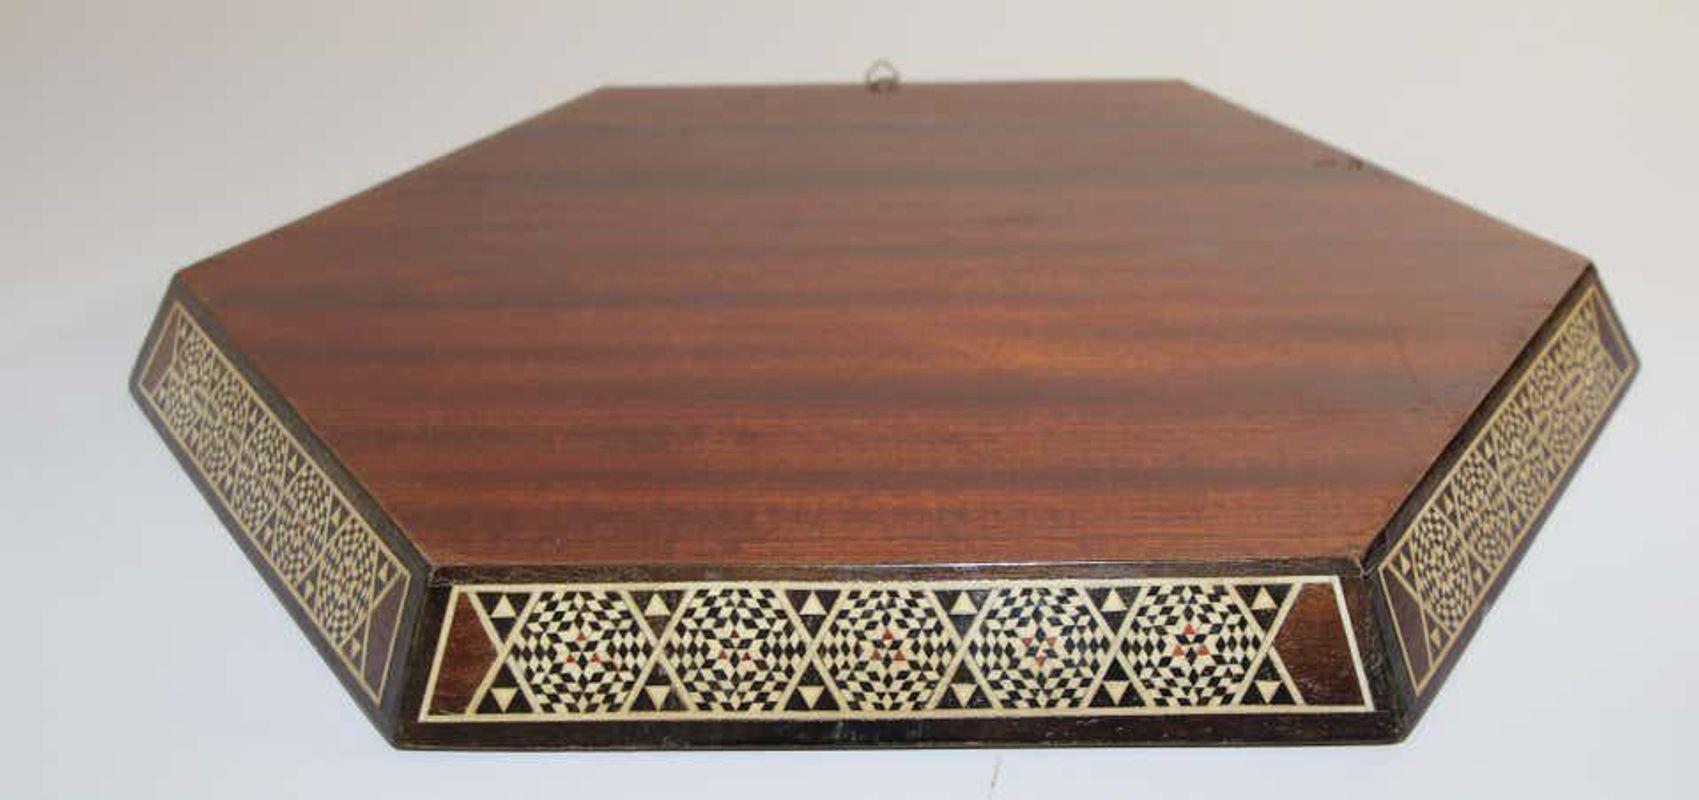 Middle Eastern Moorish inlaid with marquetry Mosaic octagonal tray.
Great inlaid micro Mosaic marquetry serving tray.
Displaying intricate mosaic inlay in geometric Moorish patterns,
circa 1950s
Size: 17.5